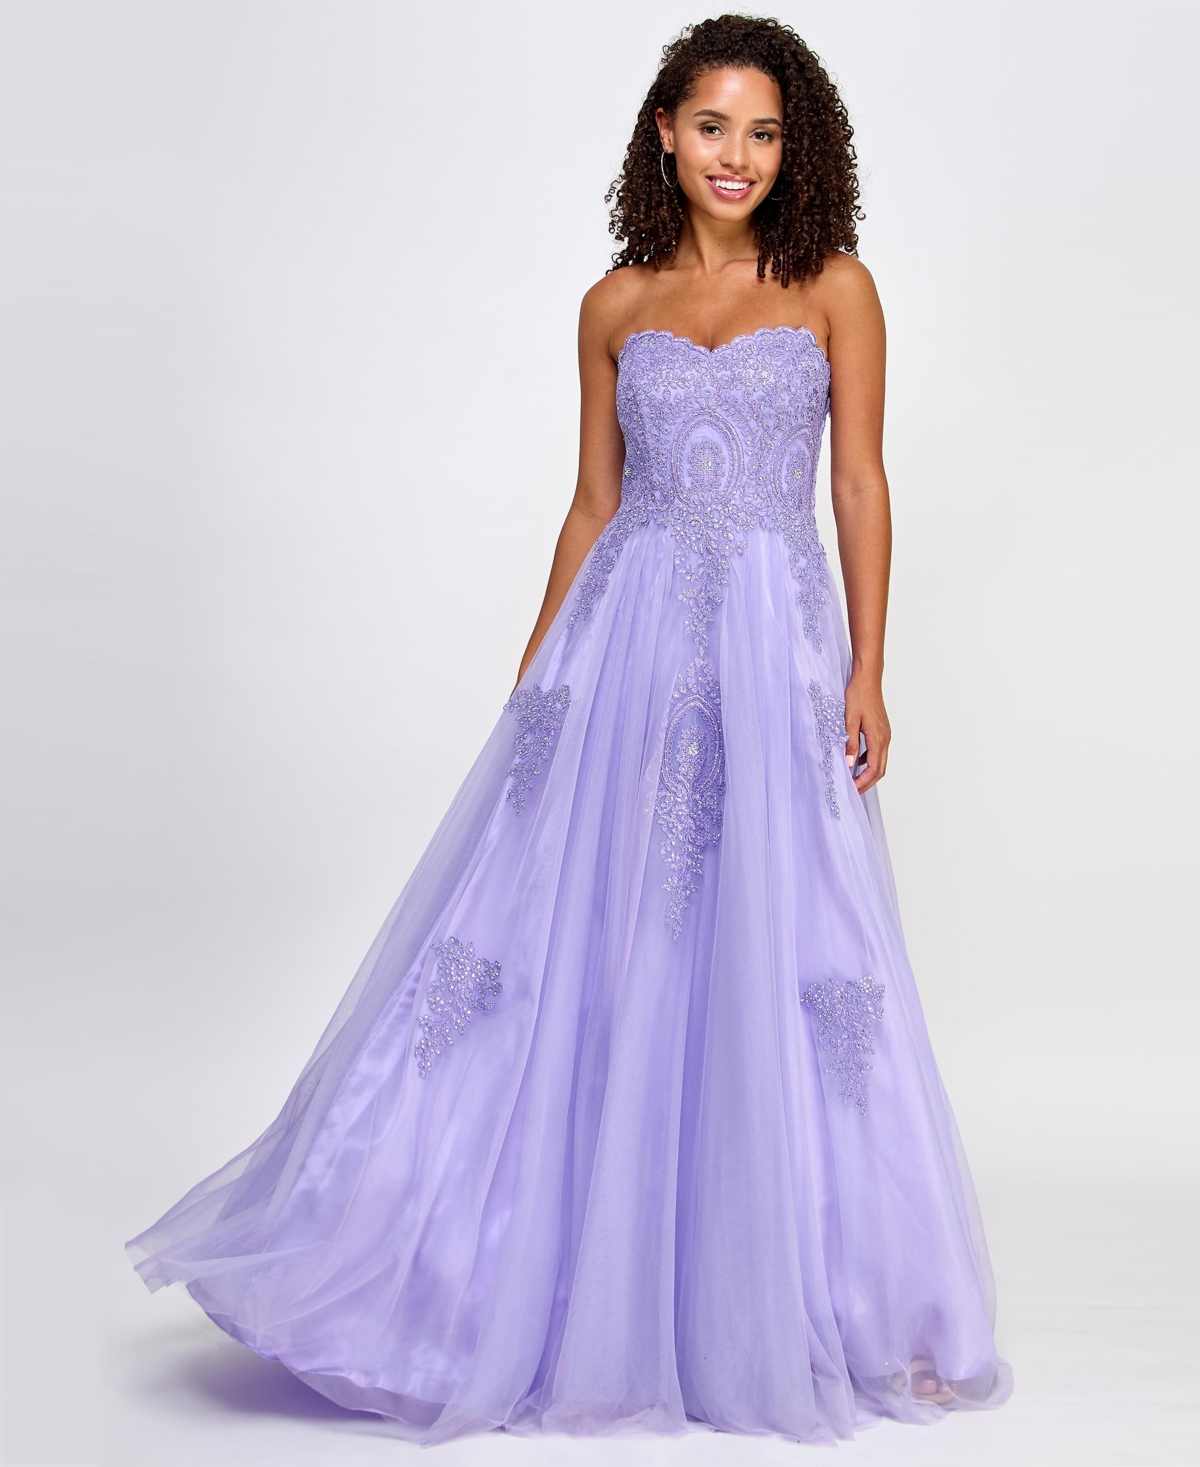 Say Yes Juniors' Strapless Embellished Ballgown, Created For Macy's In Periwinkle,lilac